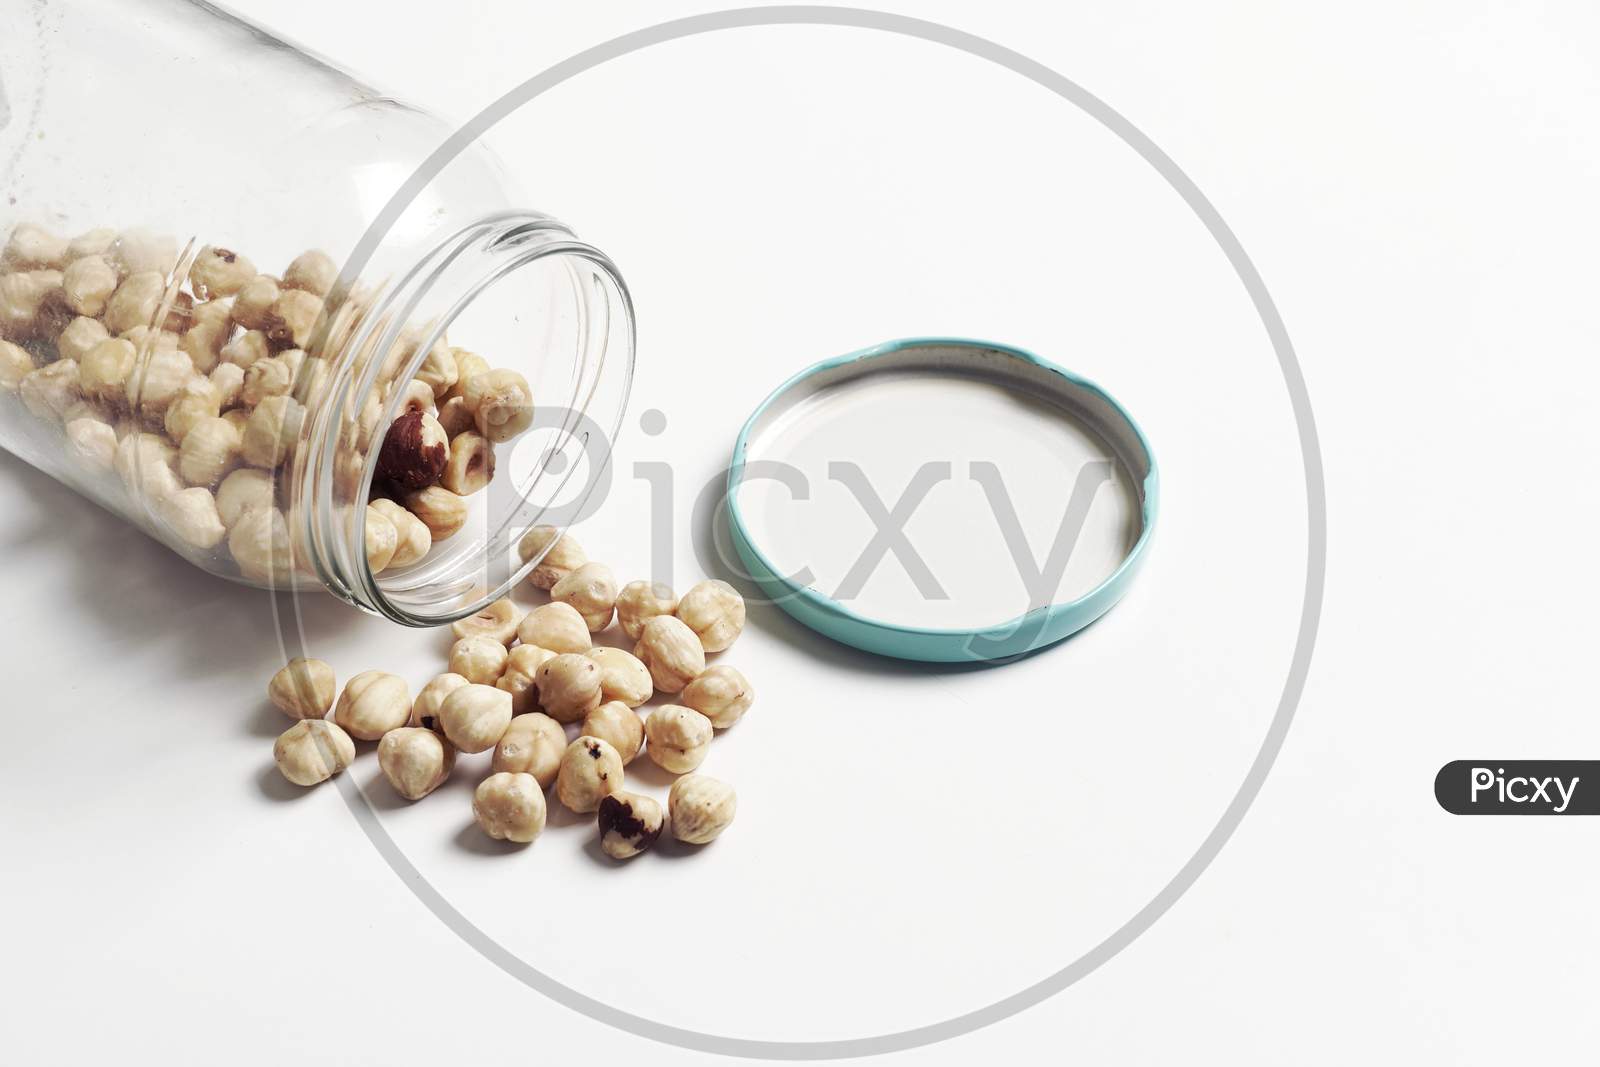 Chickpeas Spilling From A Glass Jar On White Background.